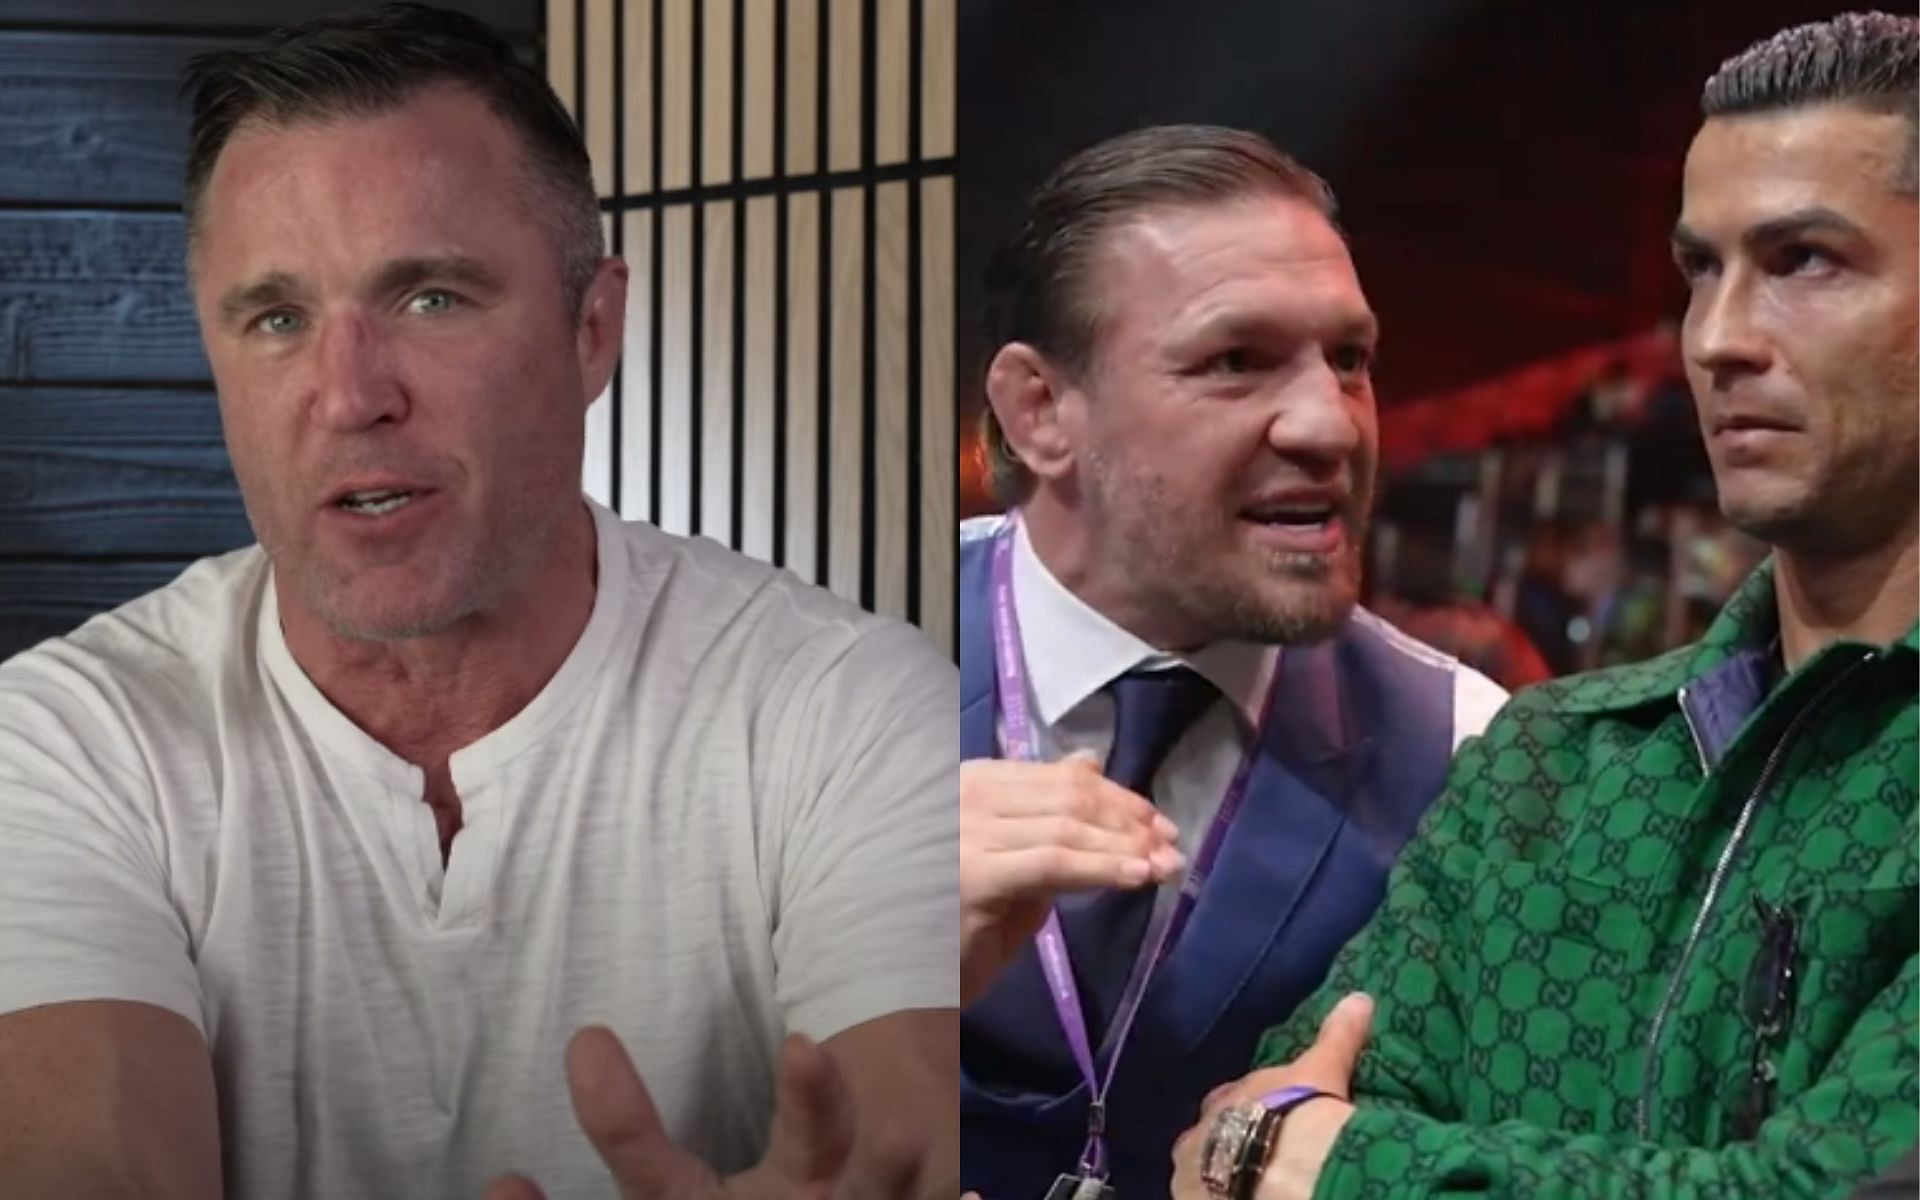 Chael Sonnen [Left] says there was silent battle between Conor McGregor and Cristiano Ronaldo [Right] [Image courtesy: Chael Sonnen - YouTube, and @boxingontnt - X]